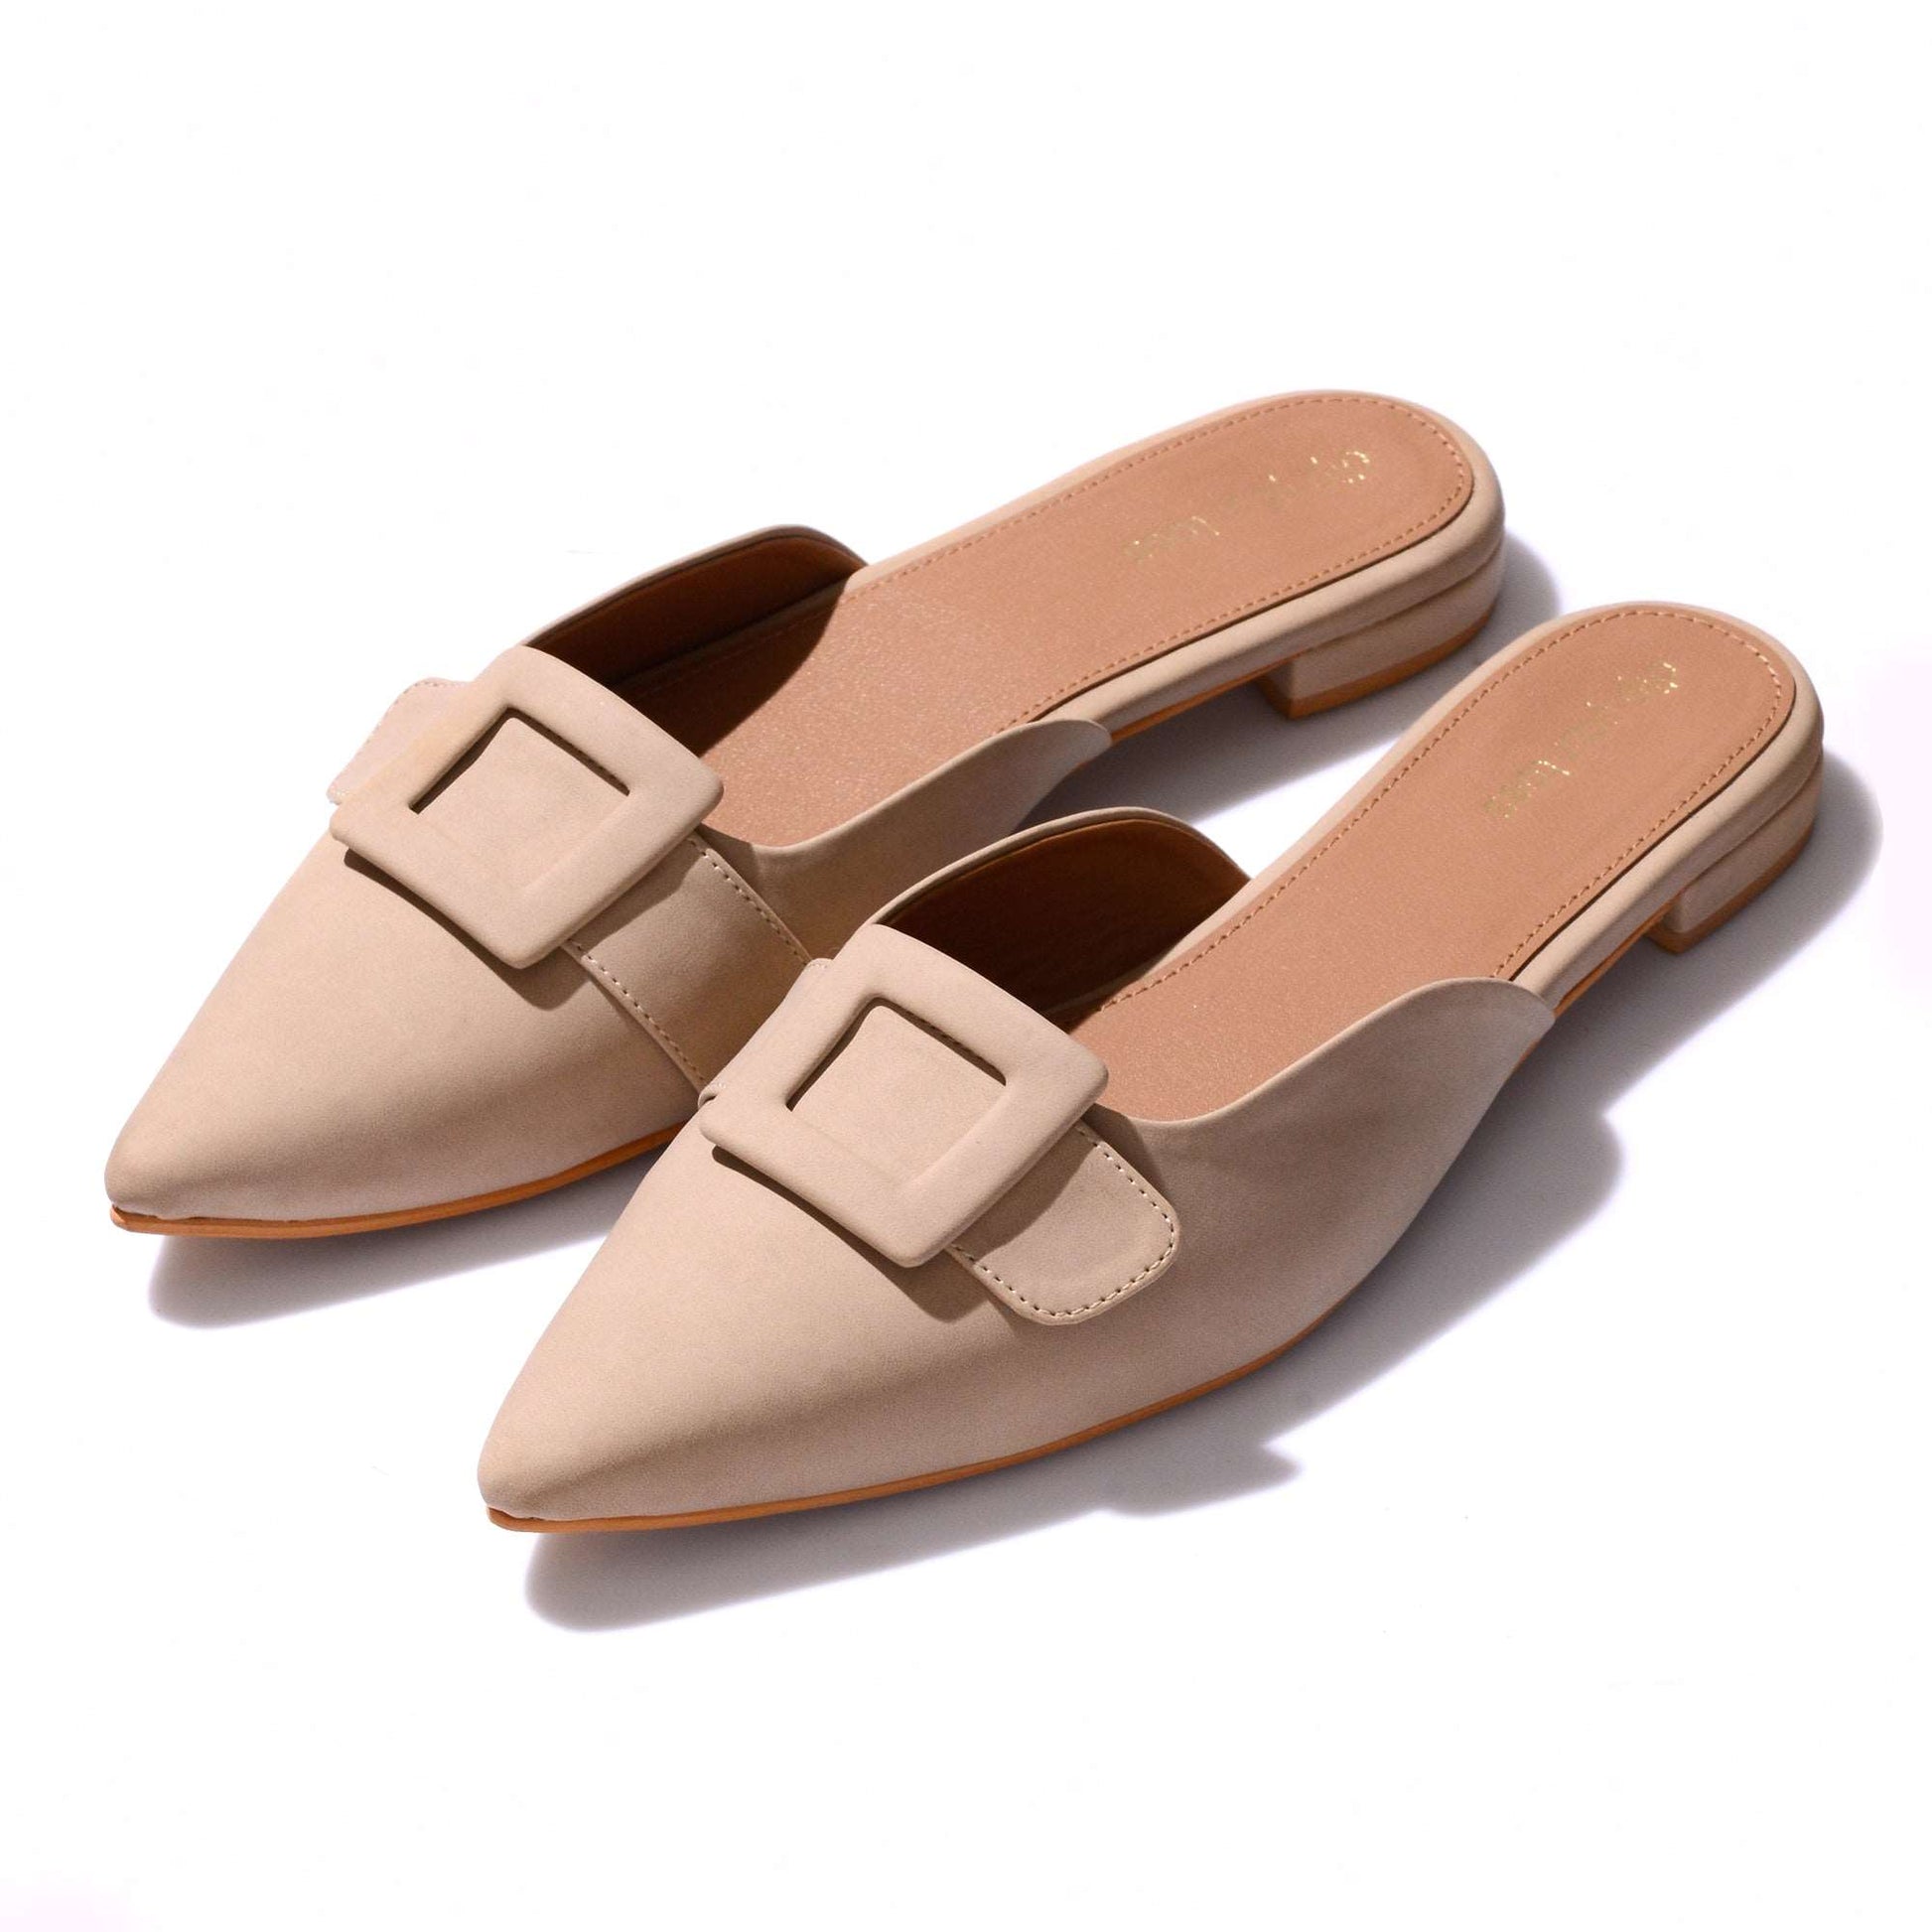 Ivory Buckled Mules